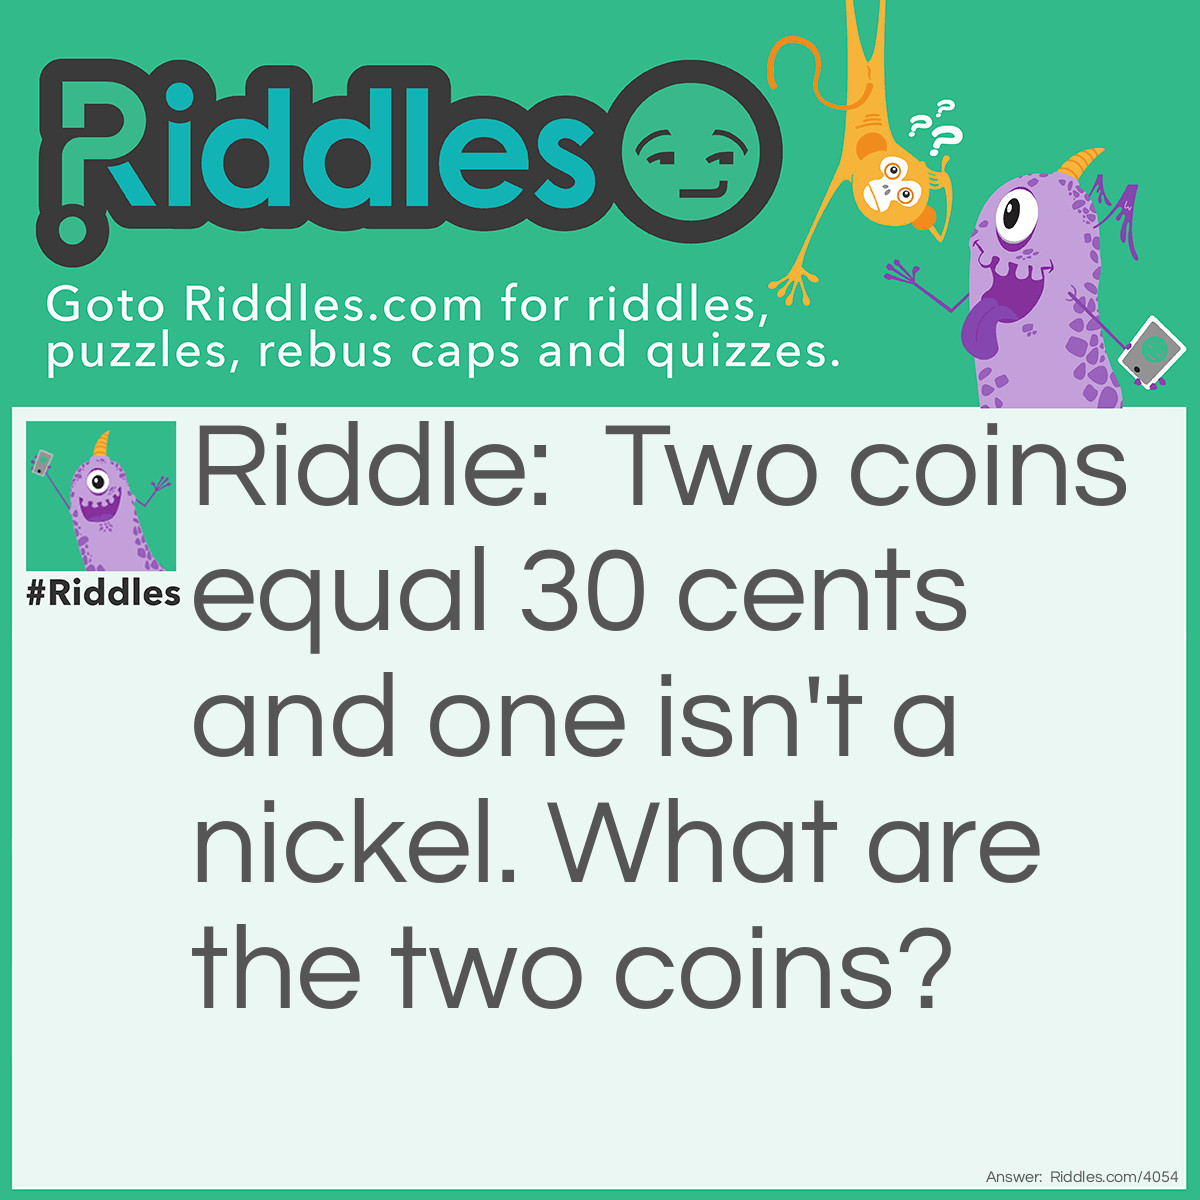 Riddle: Two coins = 30 cents and one isn't a nickel. What are the two coins? Answer: A nickel and a qaurter because, one isn't a nickel but the other one was.